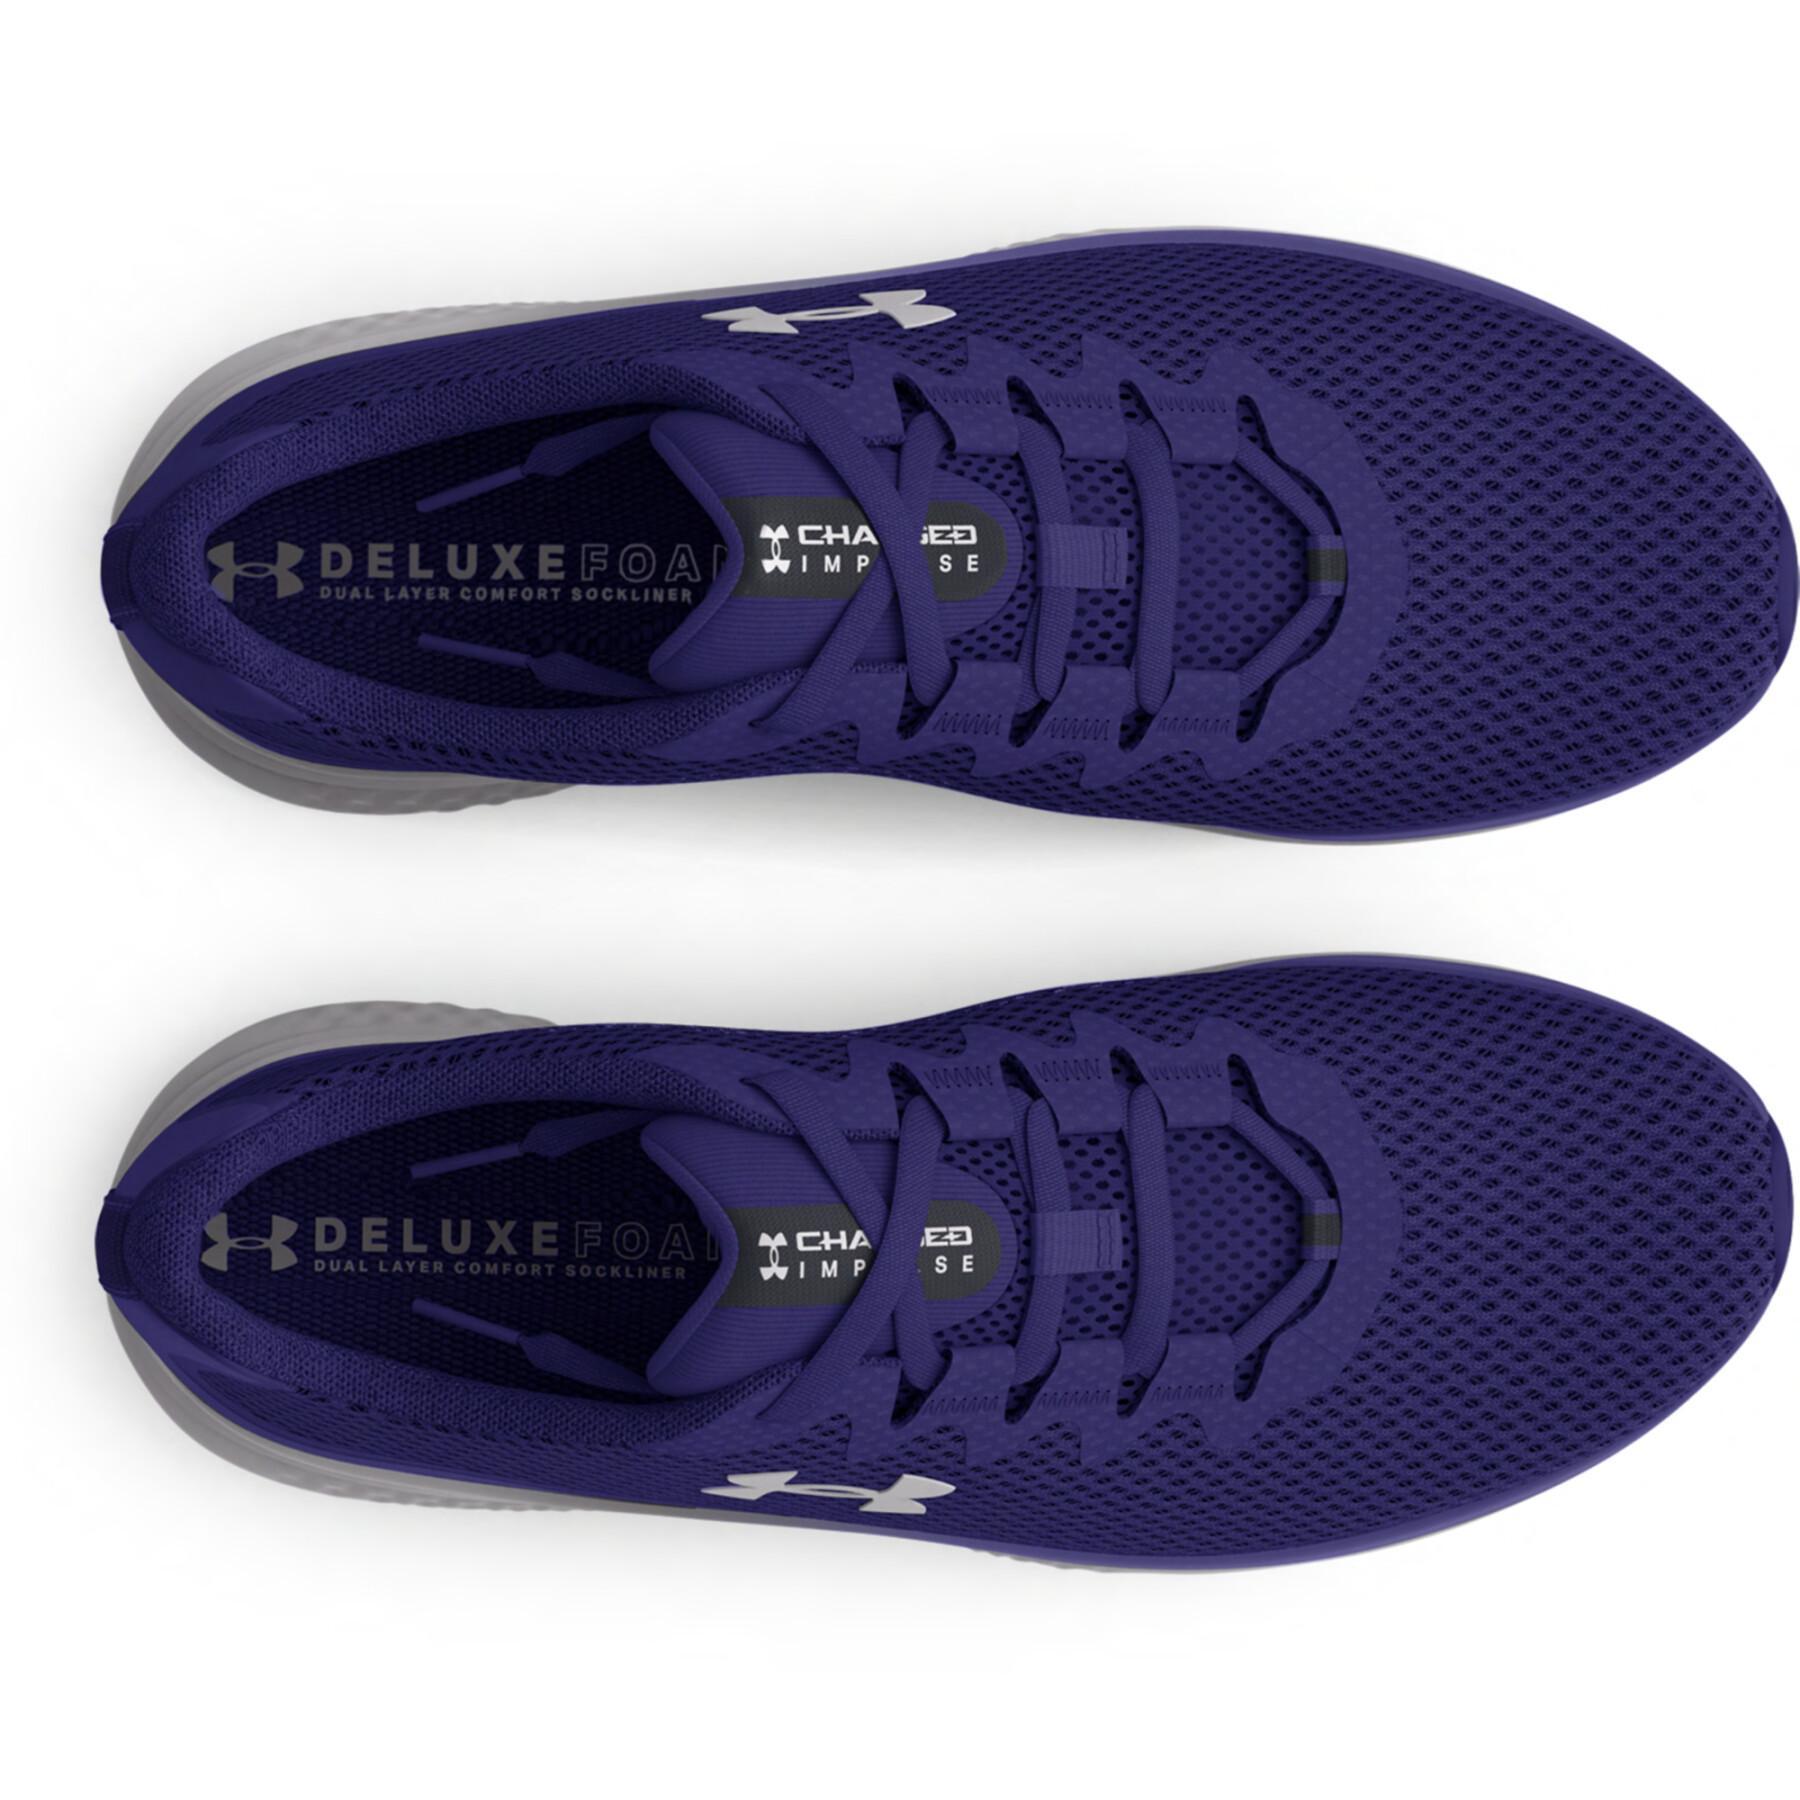 Sapatos de mulher running Under Armour Charged Impulse 3